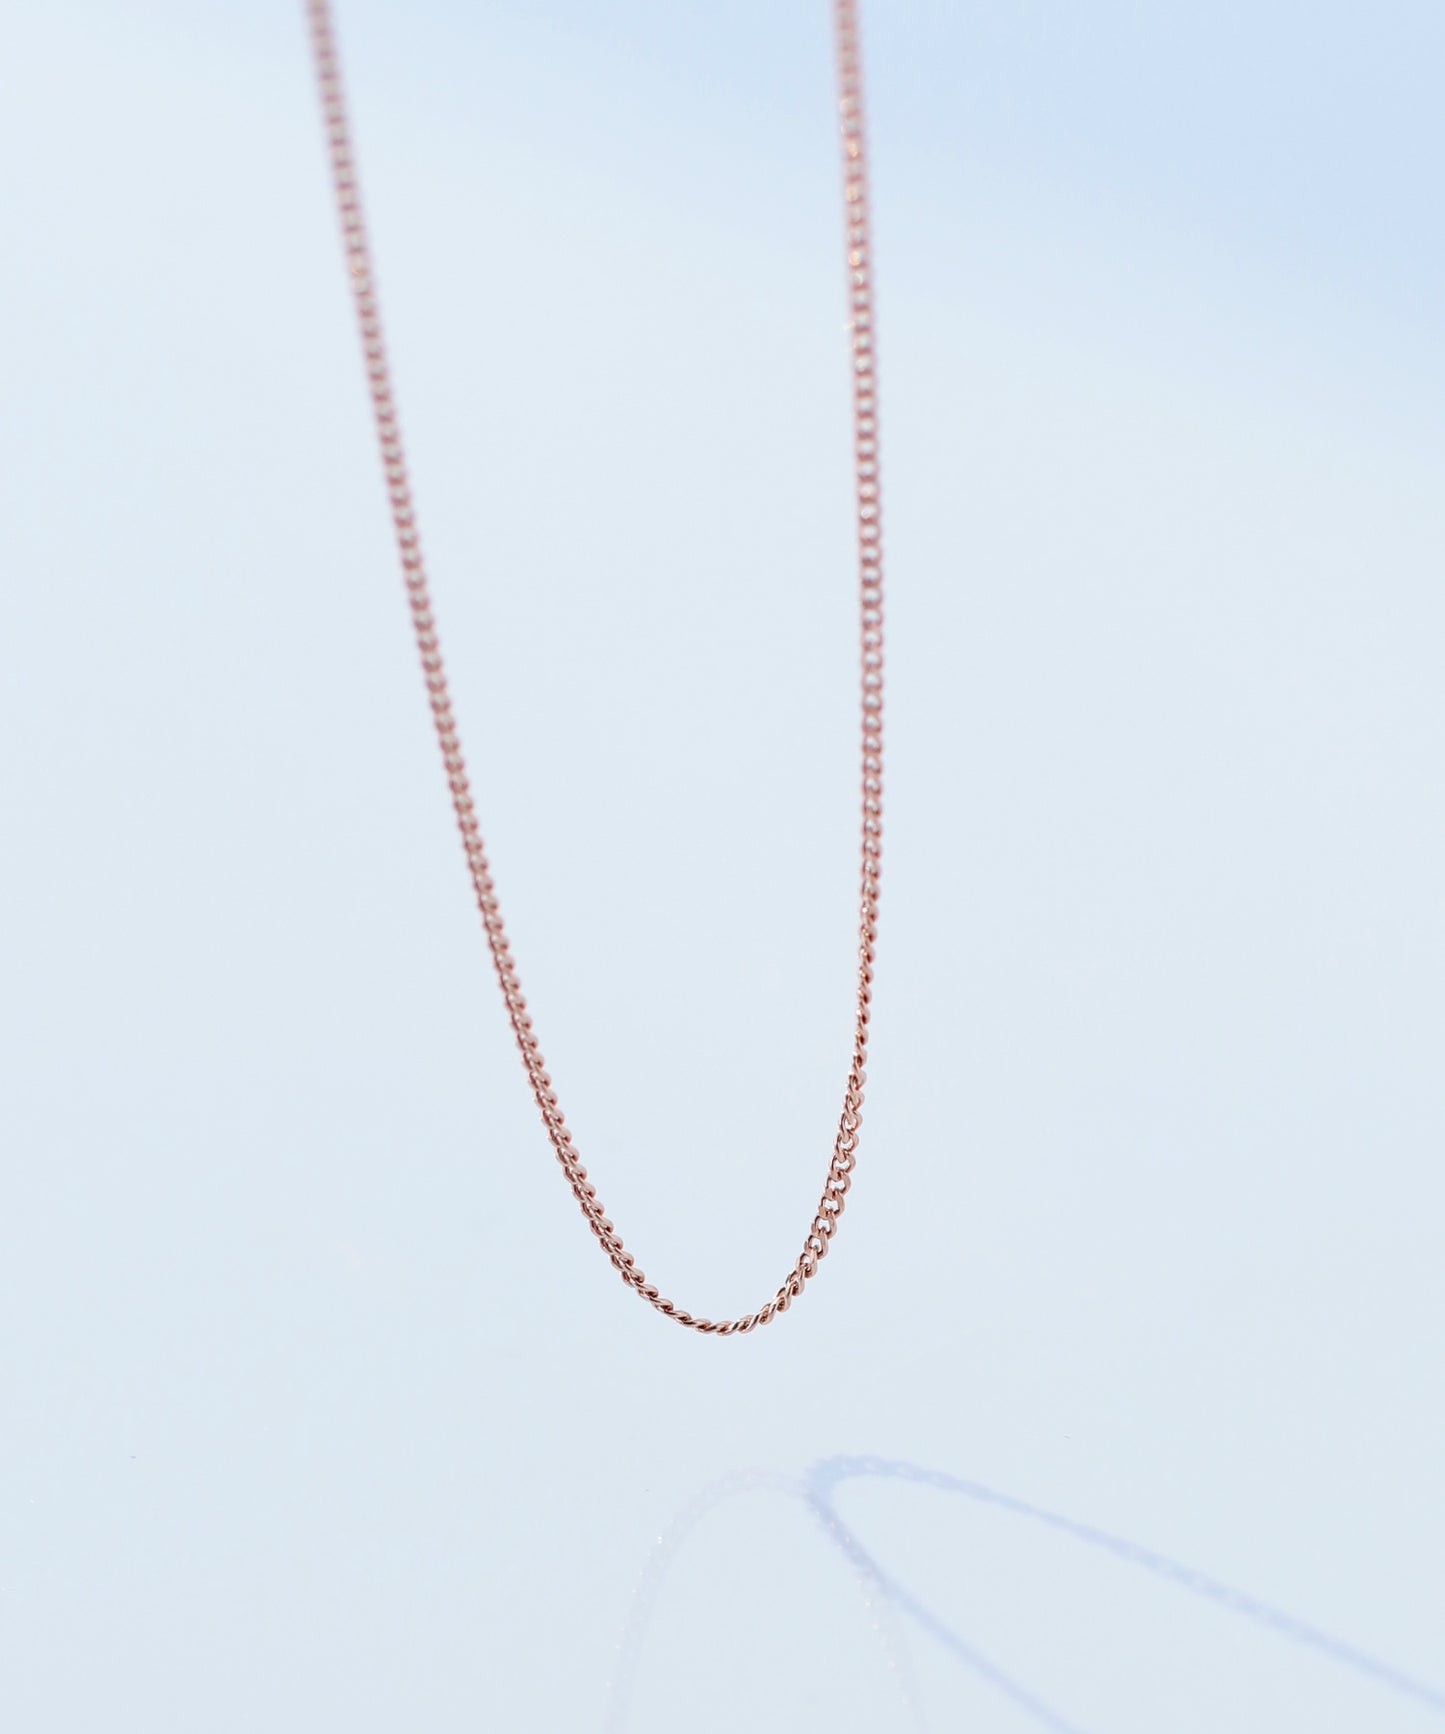 【Stainless Seel IP】Chain Necklaces